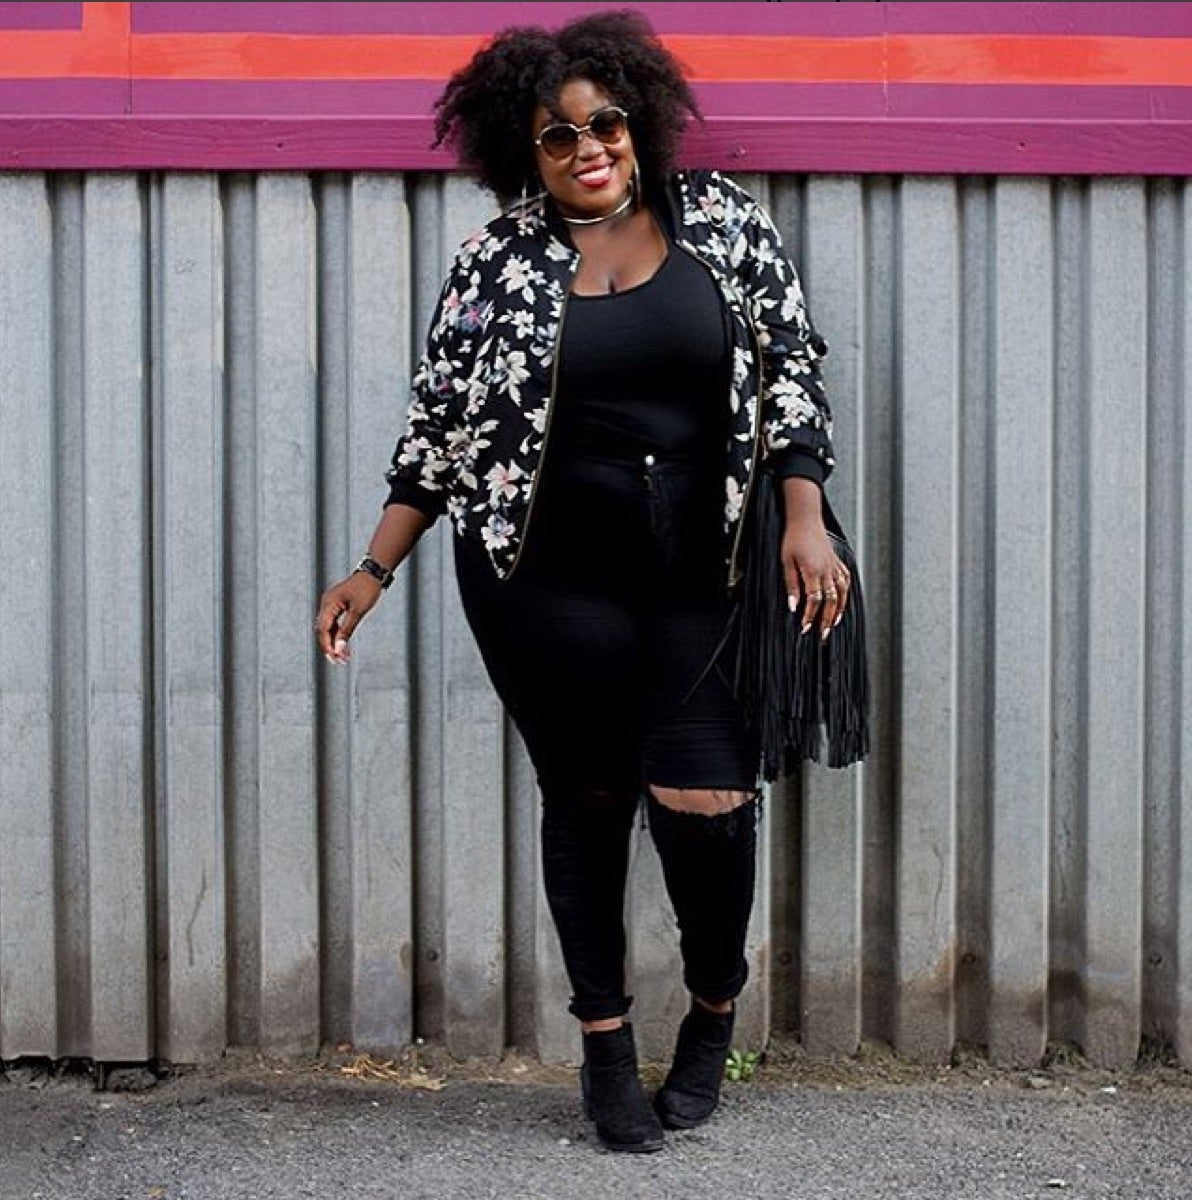 Get Major Fall Fashion Inspiration From These Fierce Curvy Bloggers
